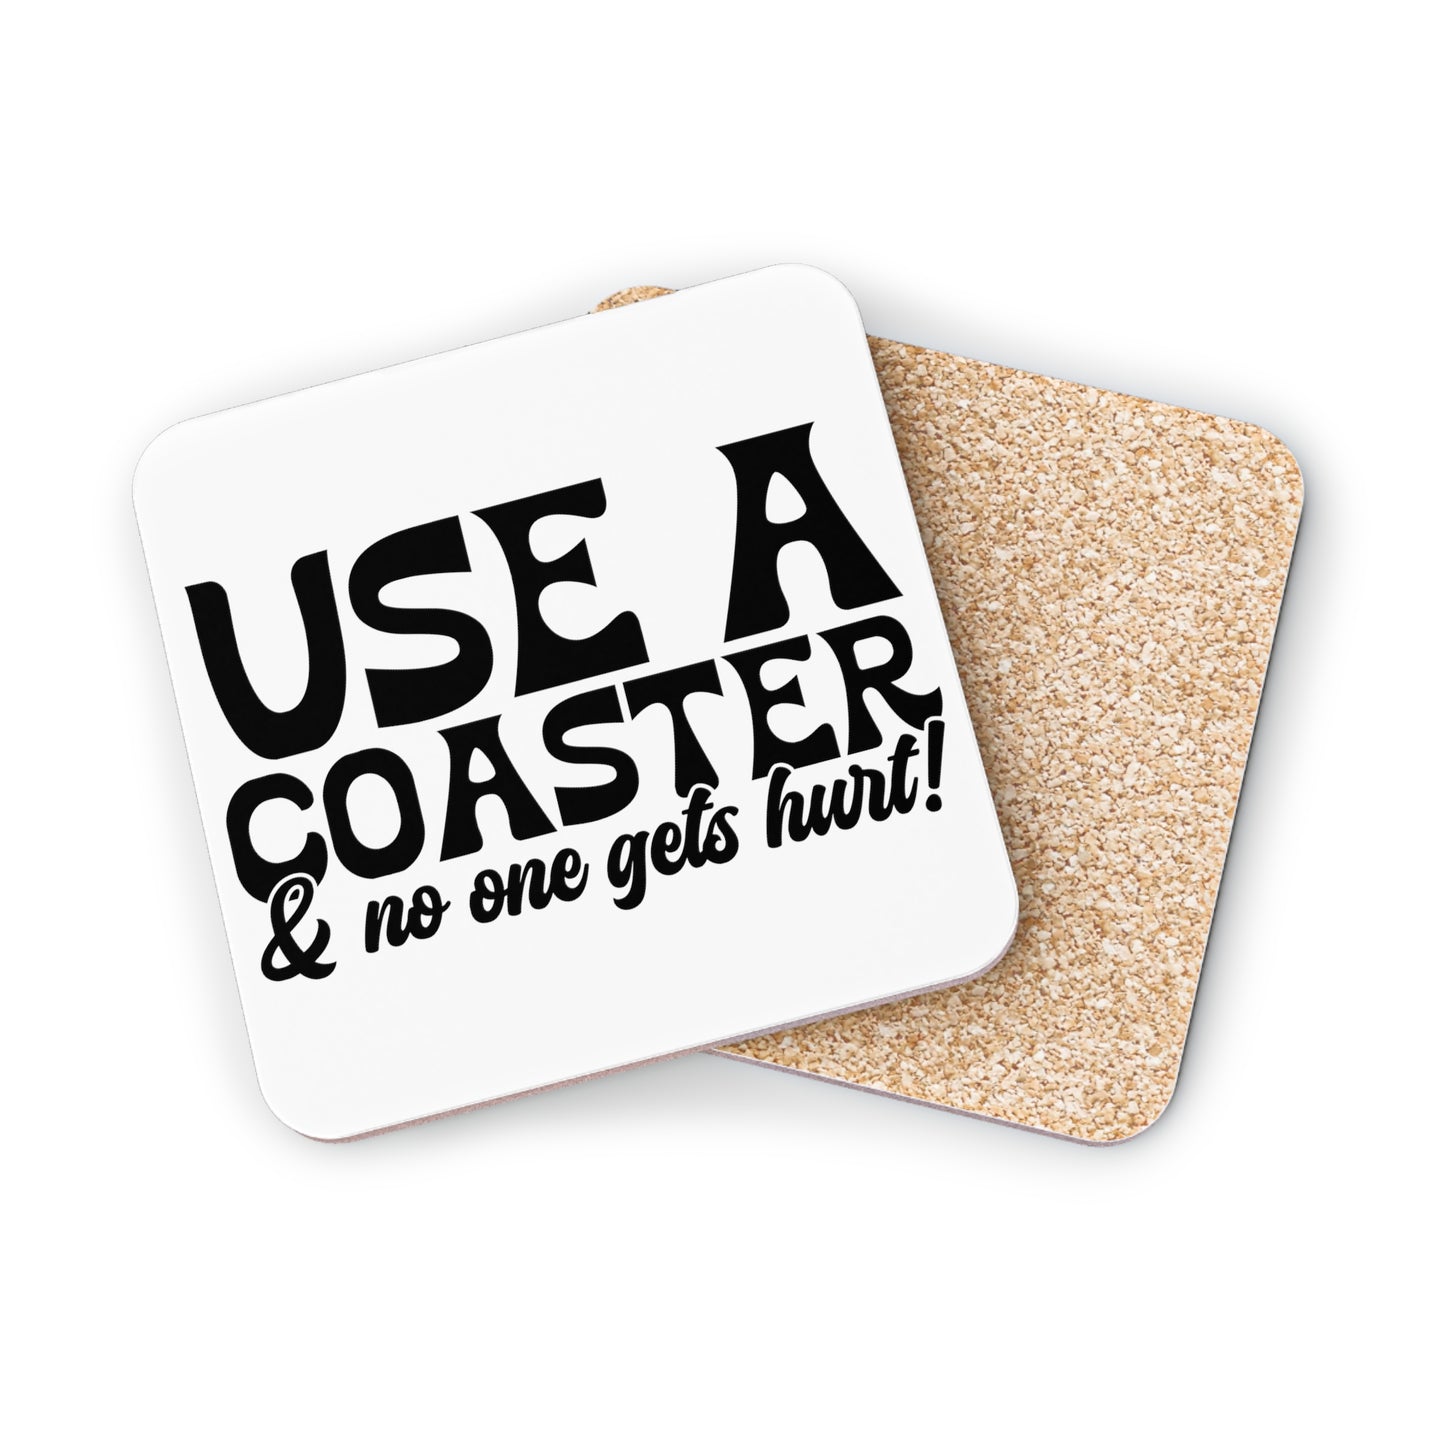 "Use A Coaster And No One Gets Hurt" Square Coasters